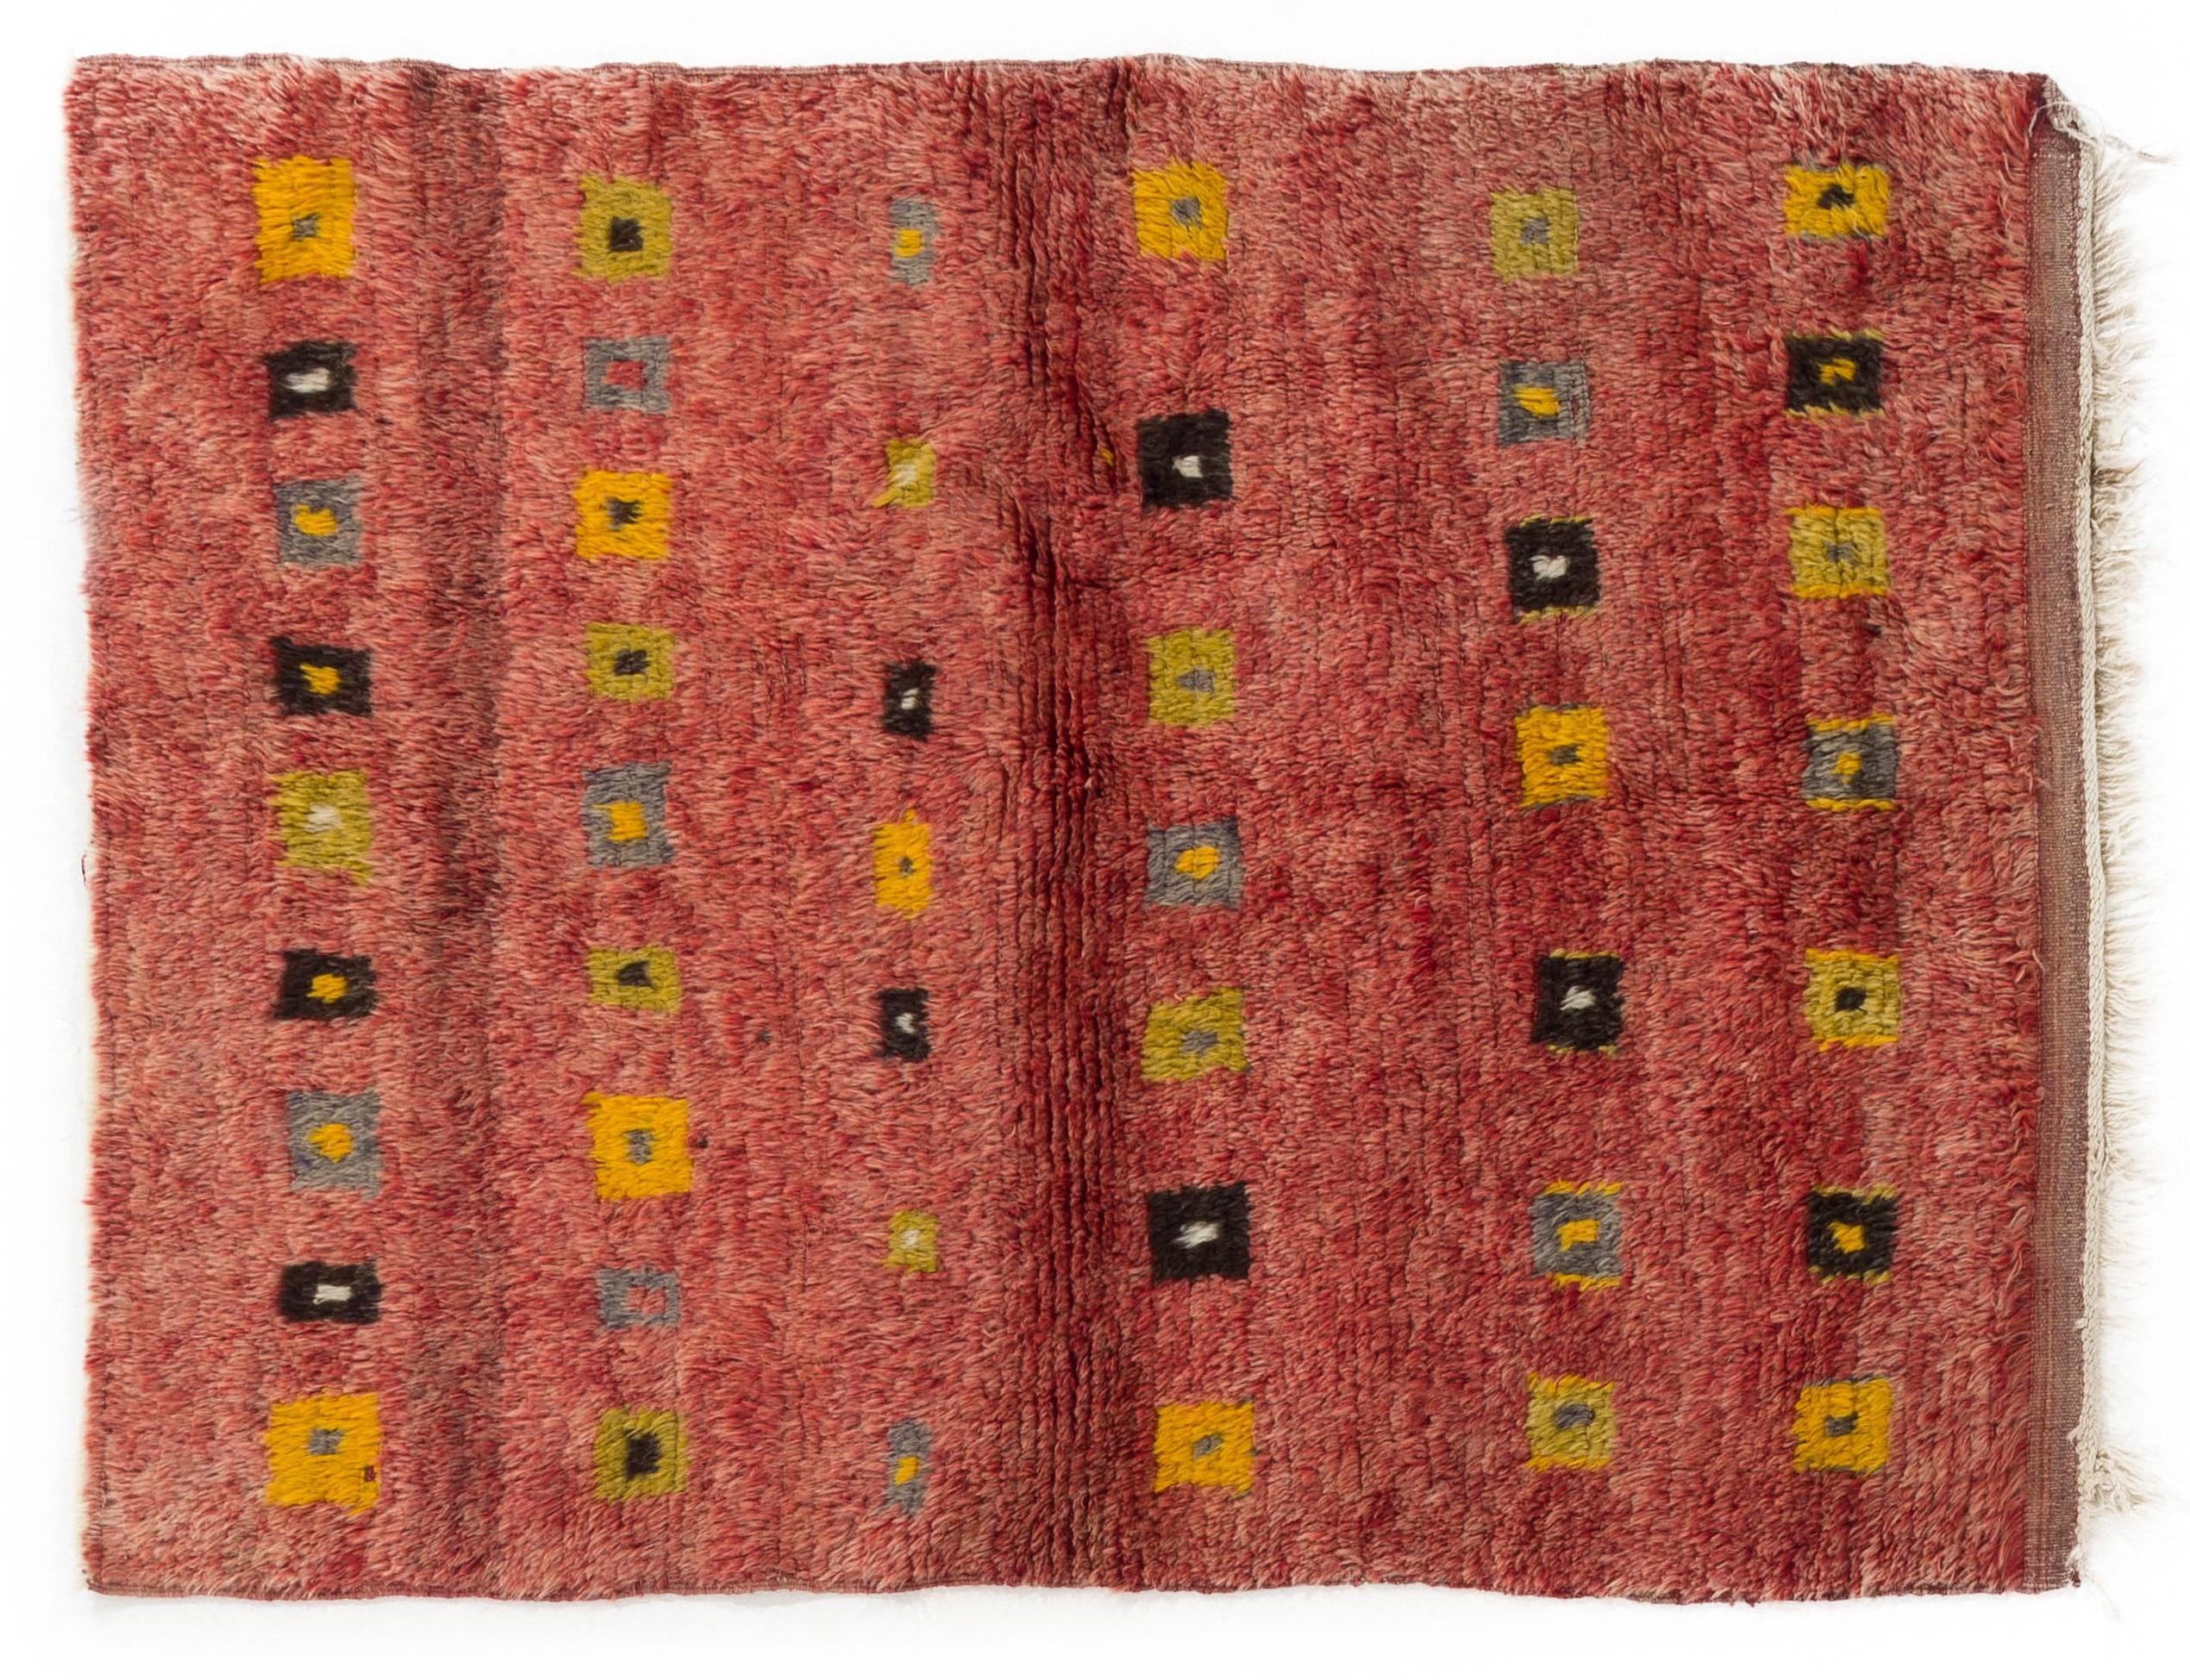 Hand-Knotted Tulu Rug in Soft Red, Yellow, Green, Gray Colors, Custom Options Available